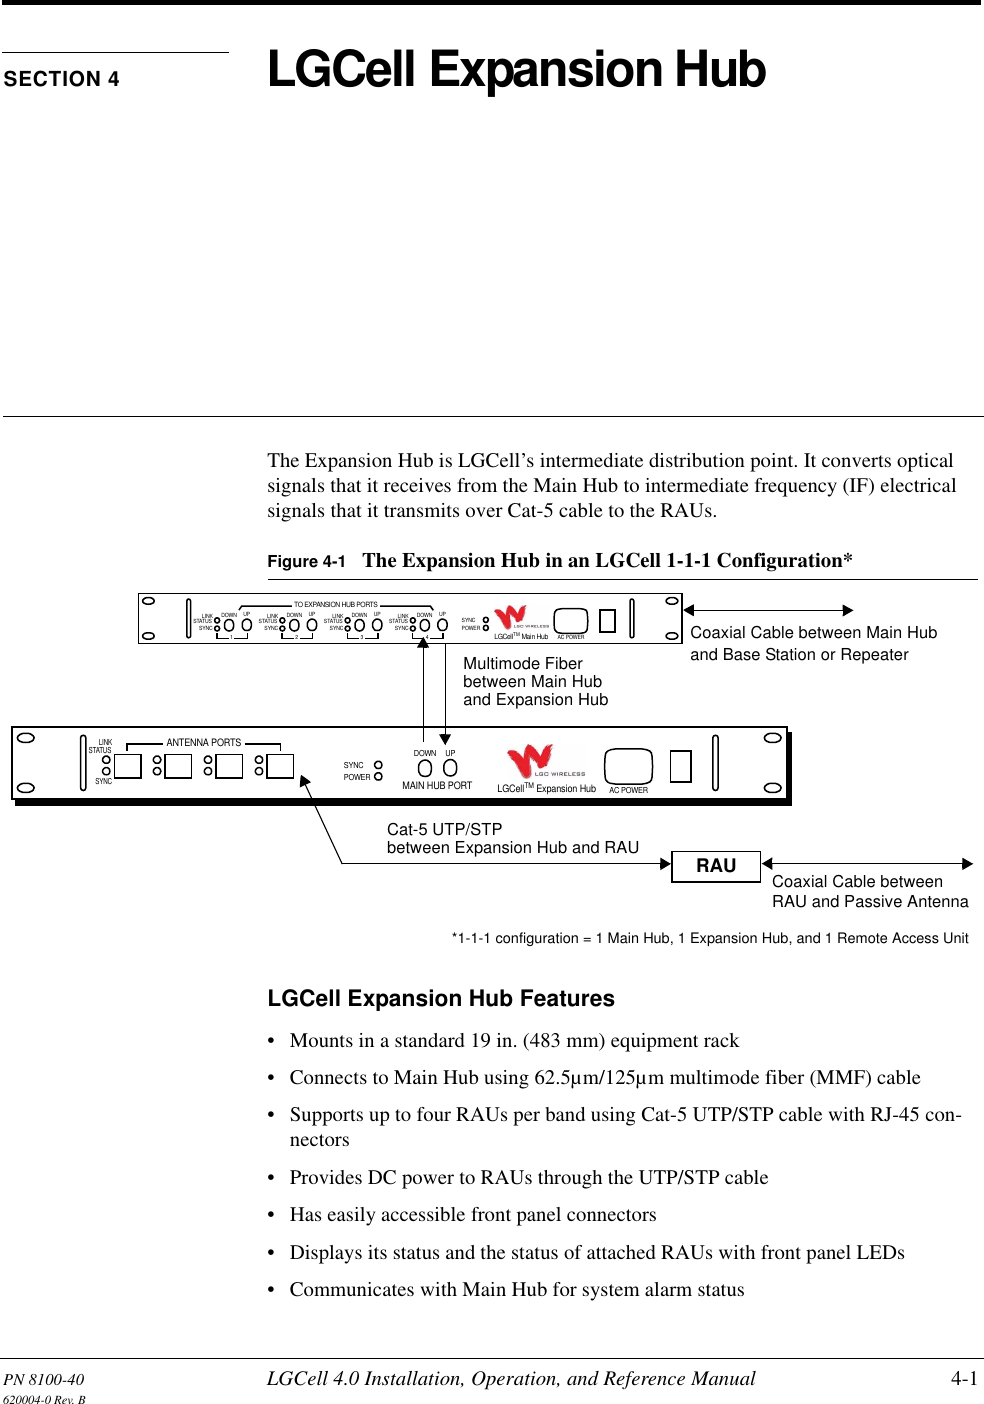 PN 8100-40 LGCell 4.0 Installation, Operation, and Reference Manual 4-1620004-0 Rev. BSECTION 4 LGCell Expansion HubThe Expansion Hub is LGCell’s intermediate distribution point. It converts optical signals that it receives from the Main Hub to intermediate frequency (IF) electrical signals that it transmits over Cat-5 cable to the RAUs.Figure 4-1 The Expansion Hub in an LGCell 1-1-1 Configuration*LGCell Expansion Hub Features• Mounts in a standard 19 in. (483 mm) equipment rack• Connects to Main Hub using 62.5µm/125µm multimode fiber (MMF) cable• Supports up to four RAUs per band using Cat-5 UTP/STP cable with RJ-45 con-nectors• Provides DC power to RAUs through the UTP/STP cable• Has easily accessible front panel connectors• Displays its status and the status of attached RAUs with front panel LEDs• Communicates with Main Hub for system alarm statusRAUMultimode Fiberbetween Main Huband Expansion HubCat-5 UTP/STPbetween Expansion Hub and RAUand Base Station or RepeaterCoaxial Cable betweenCoaxial Cable between Main HubAC POWERLGCellTM Main HubSYNCPOWERLINKSYNCSTATUS DOWN UP1LINKSYNCSTATUS DOWN UP2LINKSYNCSTATUS DOWN UP3LINKSYNCSTATUS DOWN UP4TO EXPANSION HUB PORTSAC POWERLGCellTM Expansion HubSYNCPOWERSYNCLINKSTATUSANTENNA PORTSDOWN UPMAIN HUB PORTRAU and Passive Antenna*1-1-1 configuration = 1 Main Hub, 1 Expansion Hub, and 1 Remote Access Unit